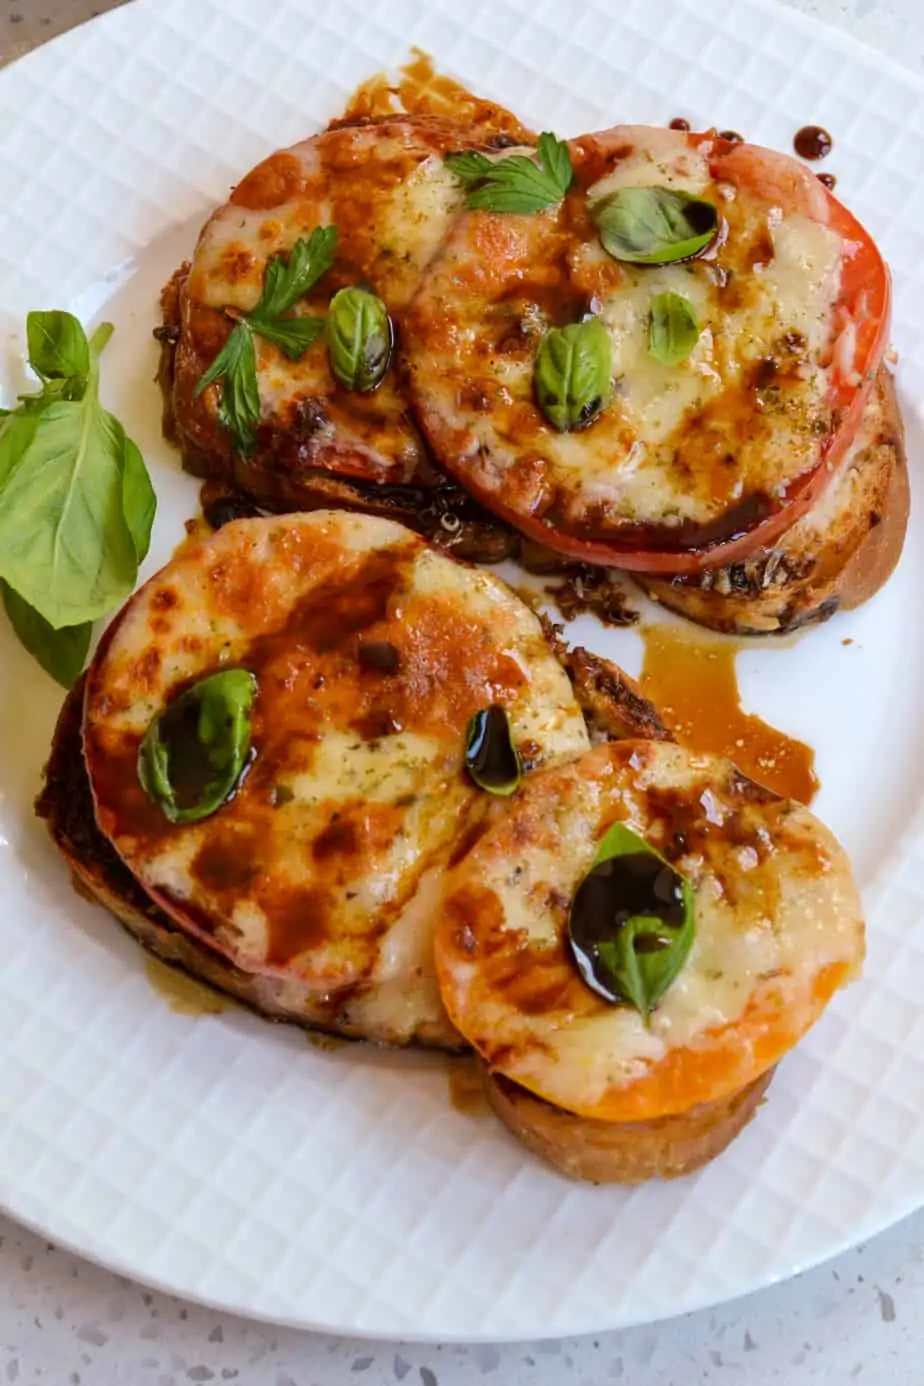 An open faced tomato sandwich with melted mozzarella and fresh herbs. 